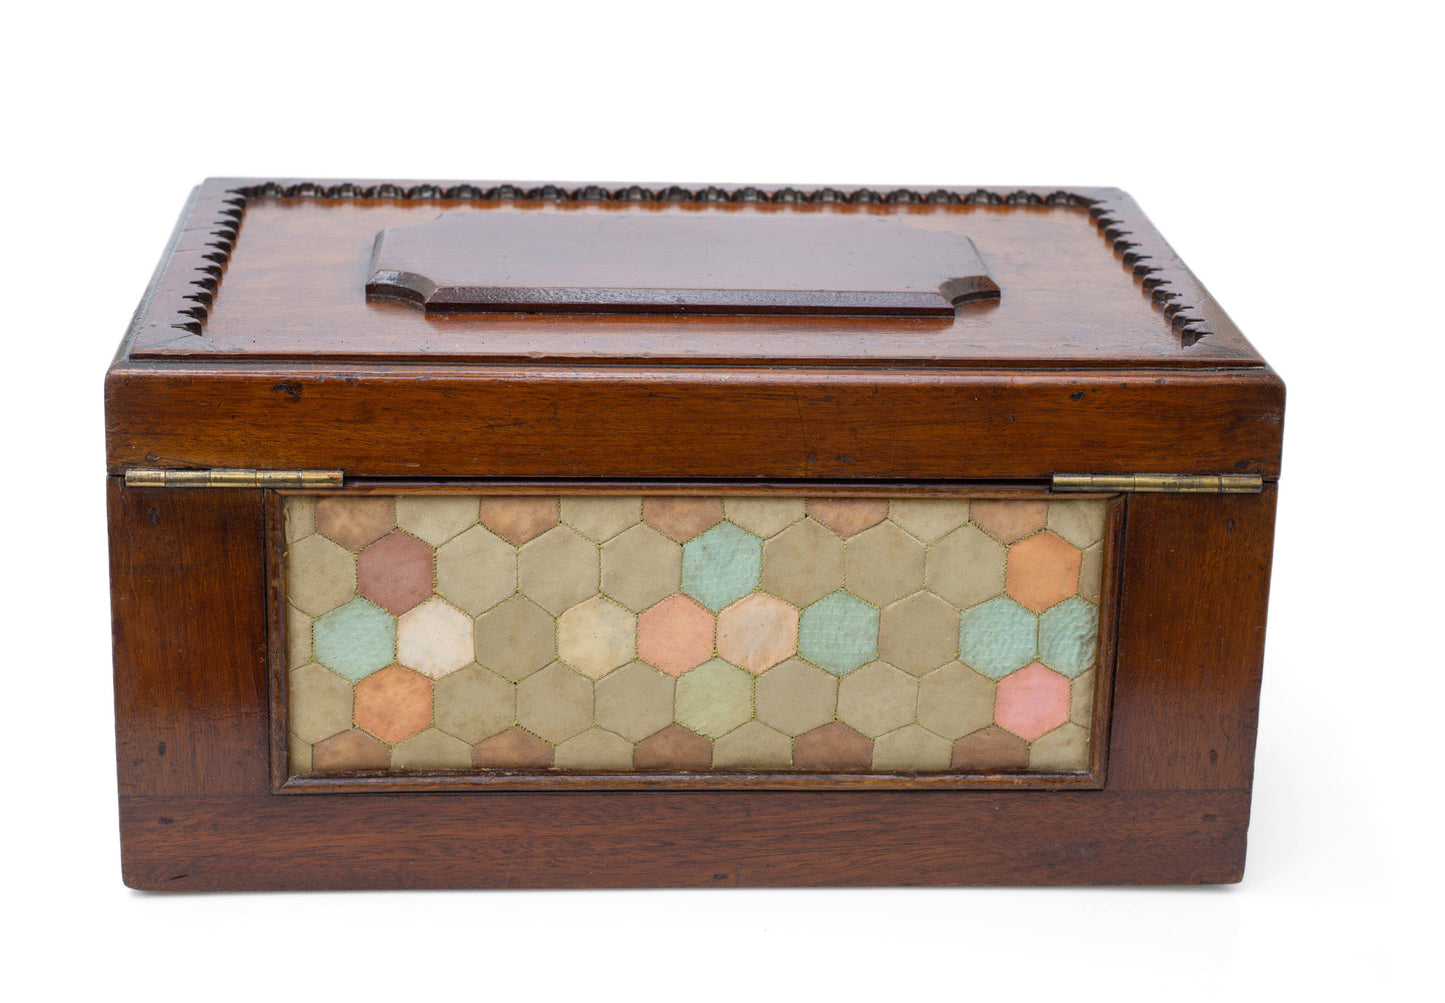 Antique Victorian Provincial Wood & Silk Patchwork Sewing / Work Box c1870 (Code 2504)